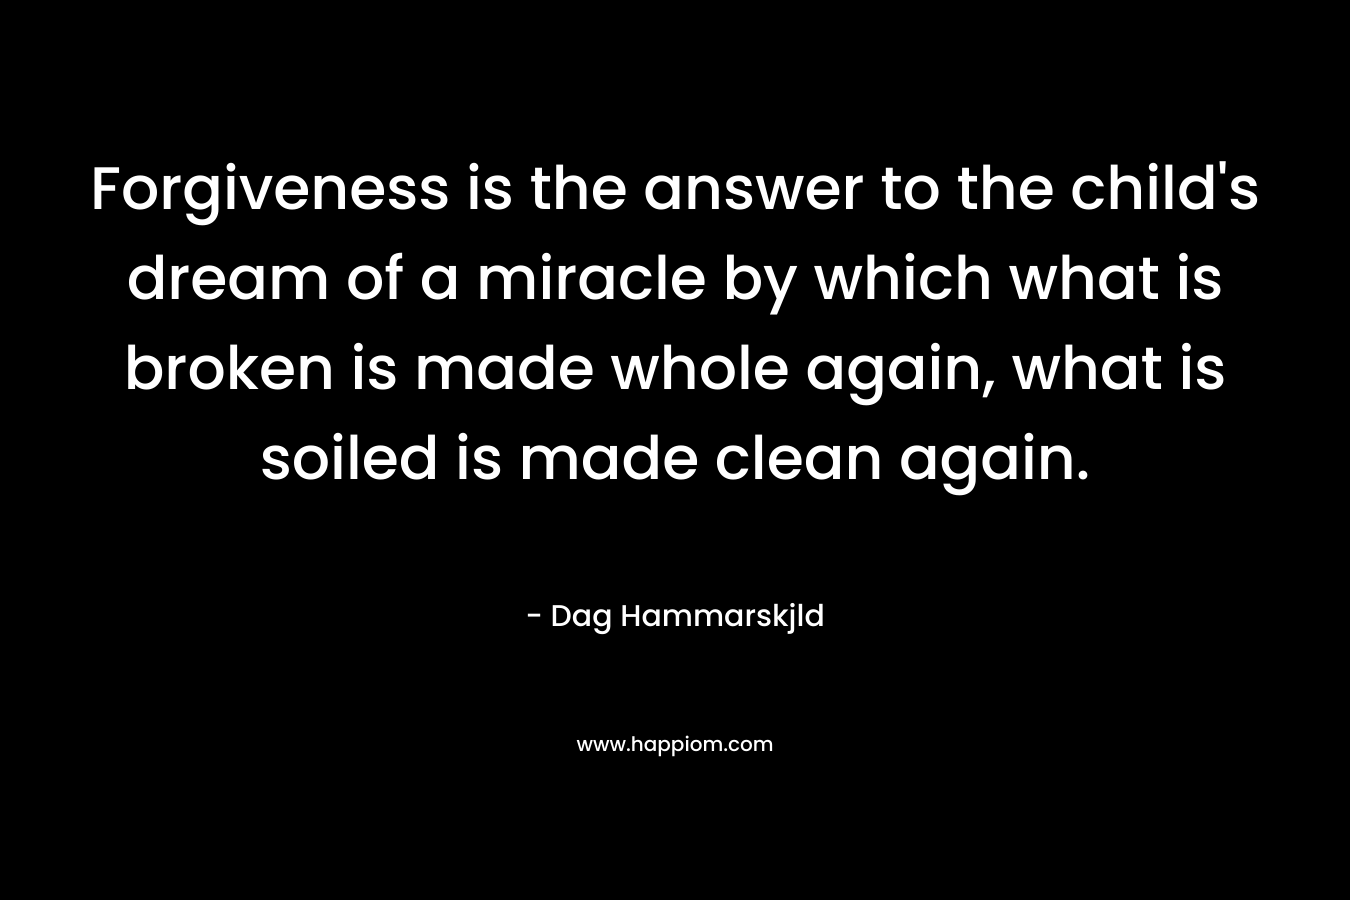 Forgiveness is the answer to the child’s dream of a miracle by which what is broken is made whole again, what is soiled is made clean again. – Dag Hammarskjld